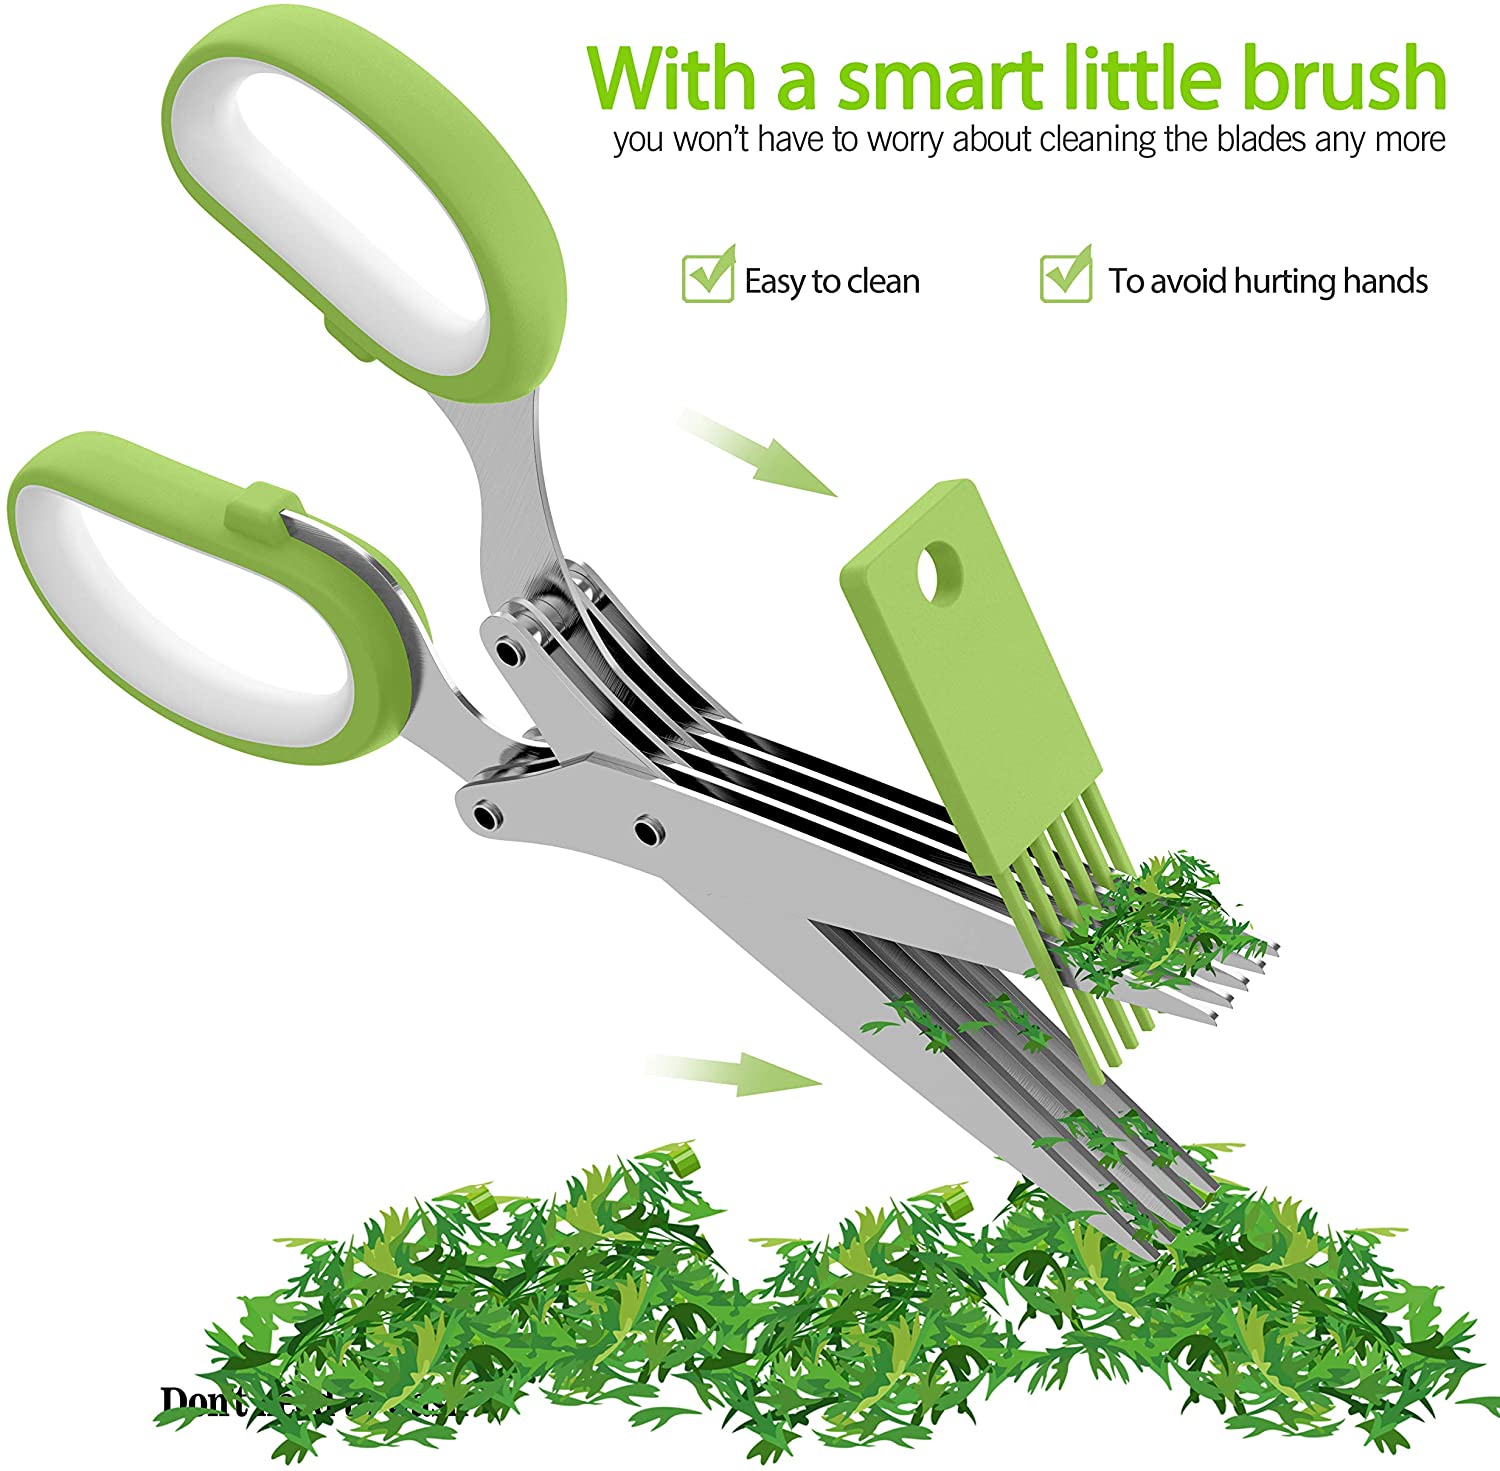 1pc 5 Blade Kitchen Herb Scissors - Ideal For Chopping Basil, Chives,  Cilantro And More - Easy To Use And Durable